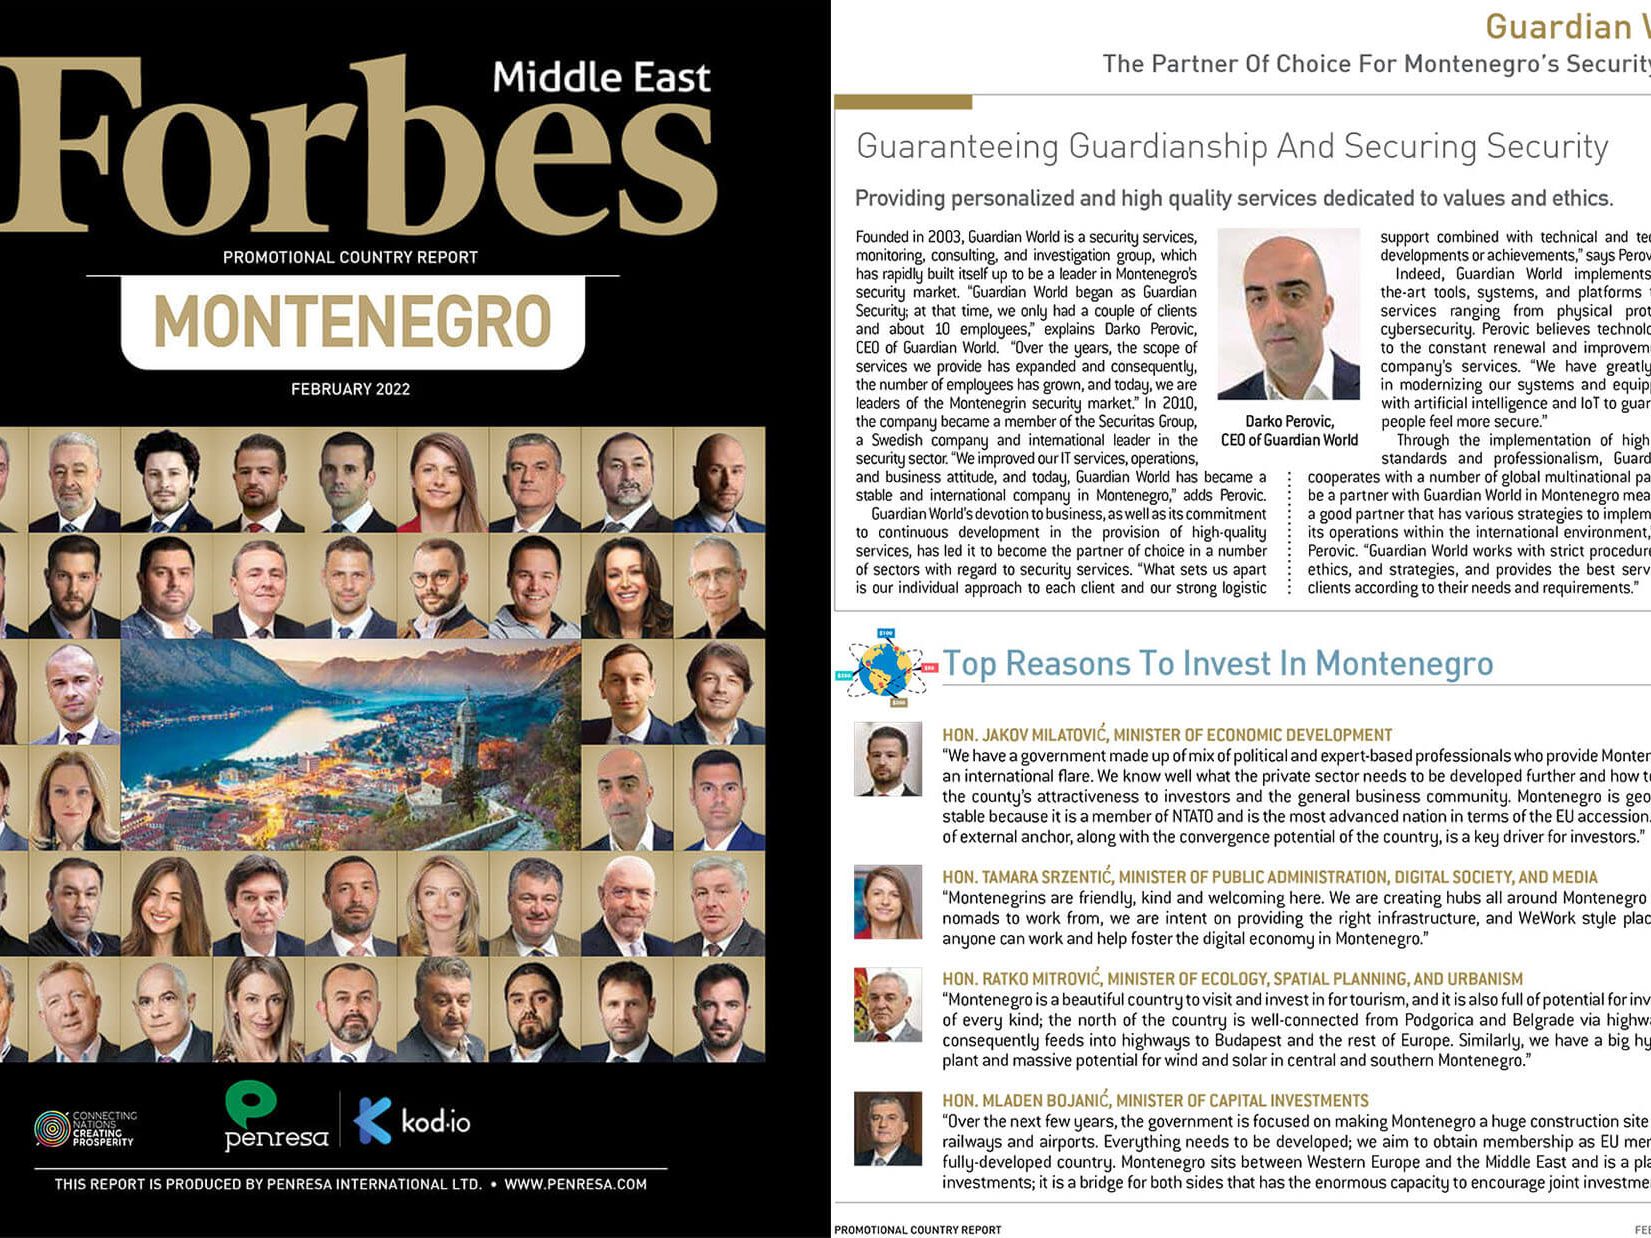 Forbes Middle East Issued Special Promotional Report About Montenegro e1659828711736